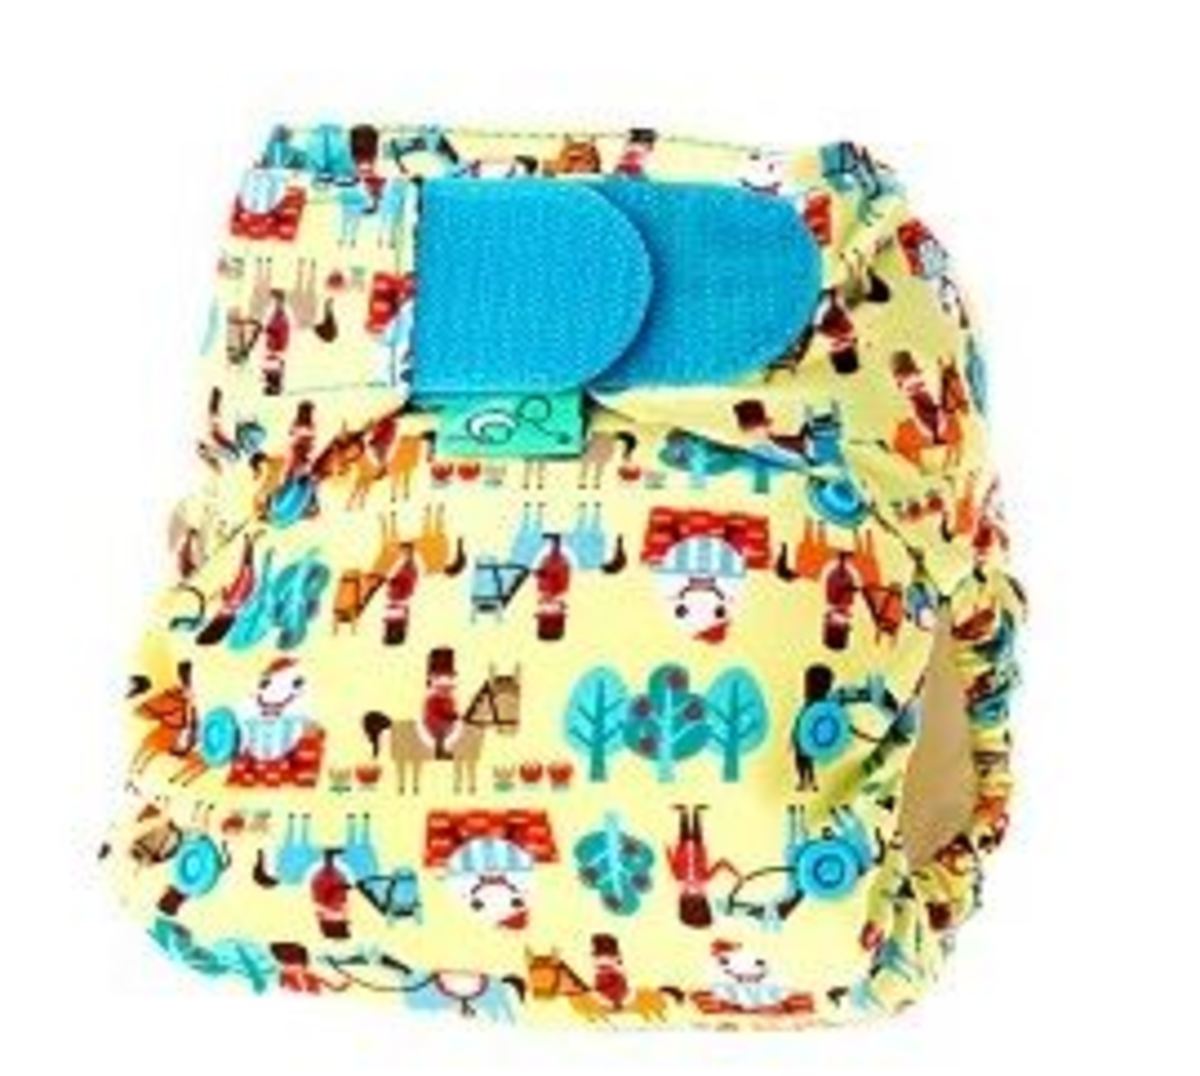 Complete Guide to Tots Bots Cloth Diaper Prints and Where to Find Them ...